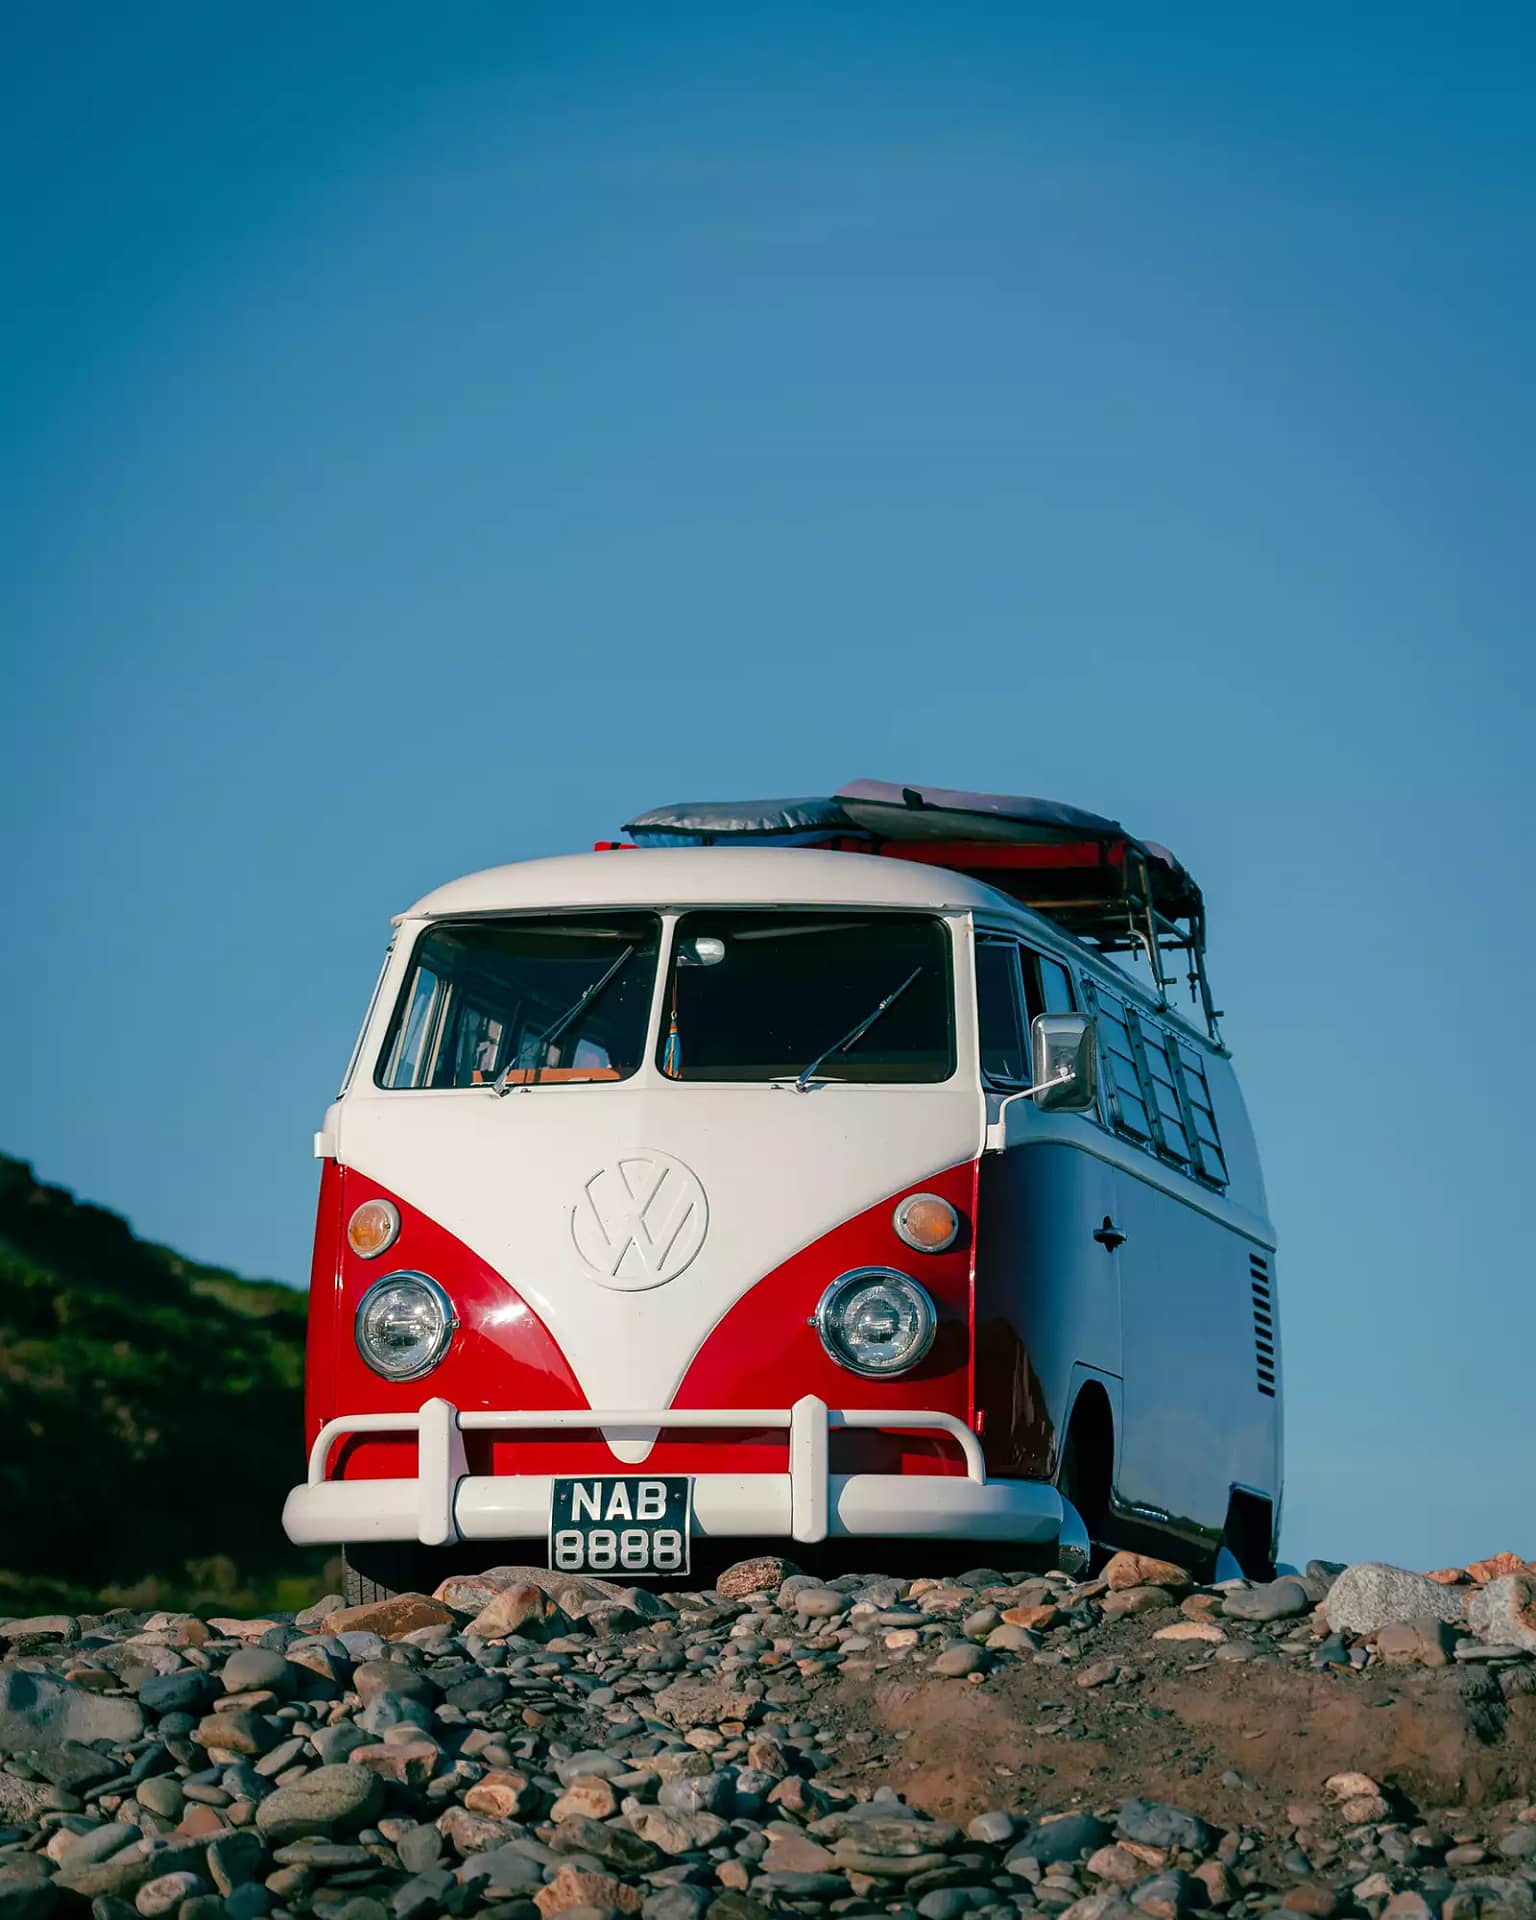 A red and white VW camper van is parked near a rocky shoreline with a deep blue sky overhead.